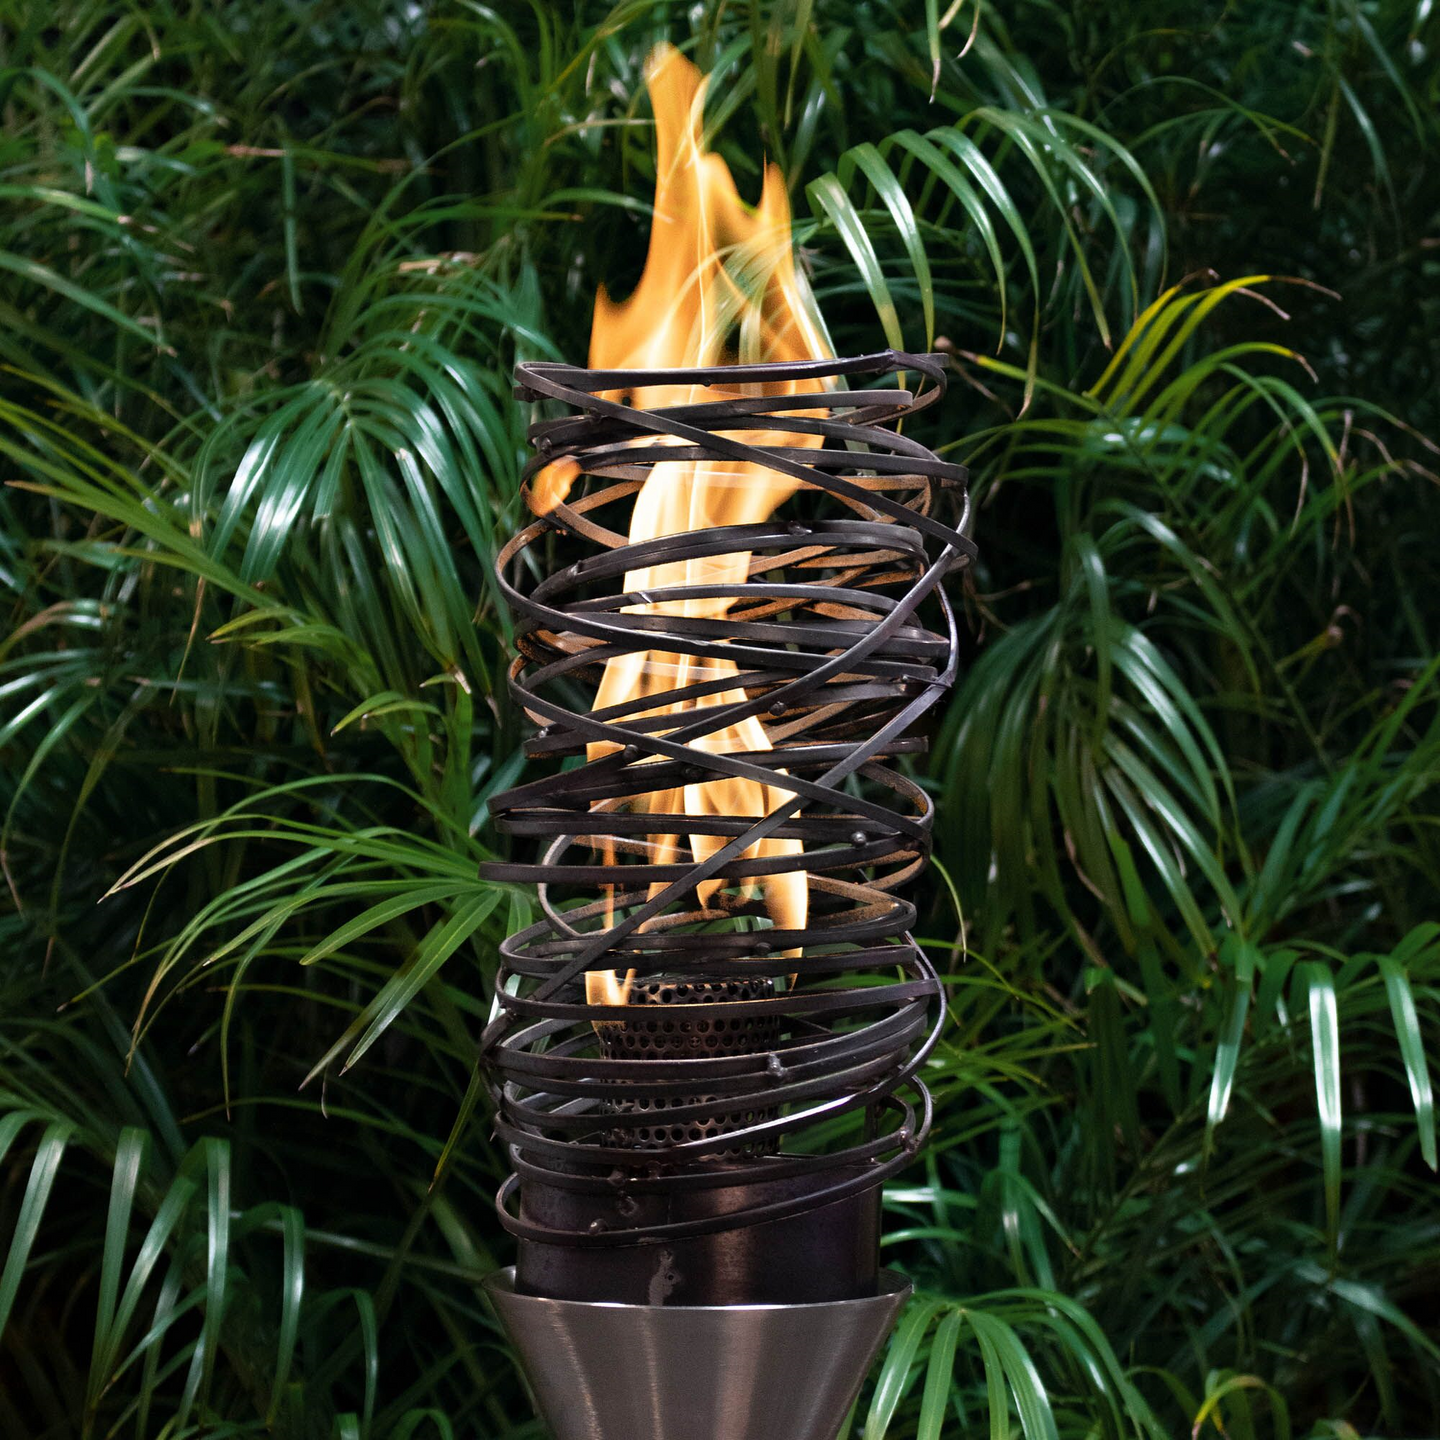 The Outdoor Plus Cyclone Fire Torch / Stainless Steel + Free Cover - The Fire Pit Collection